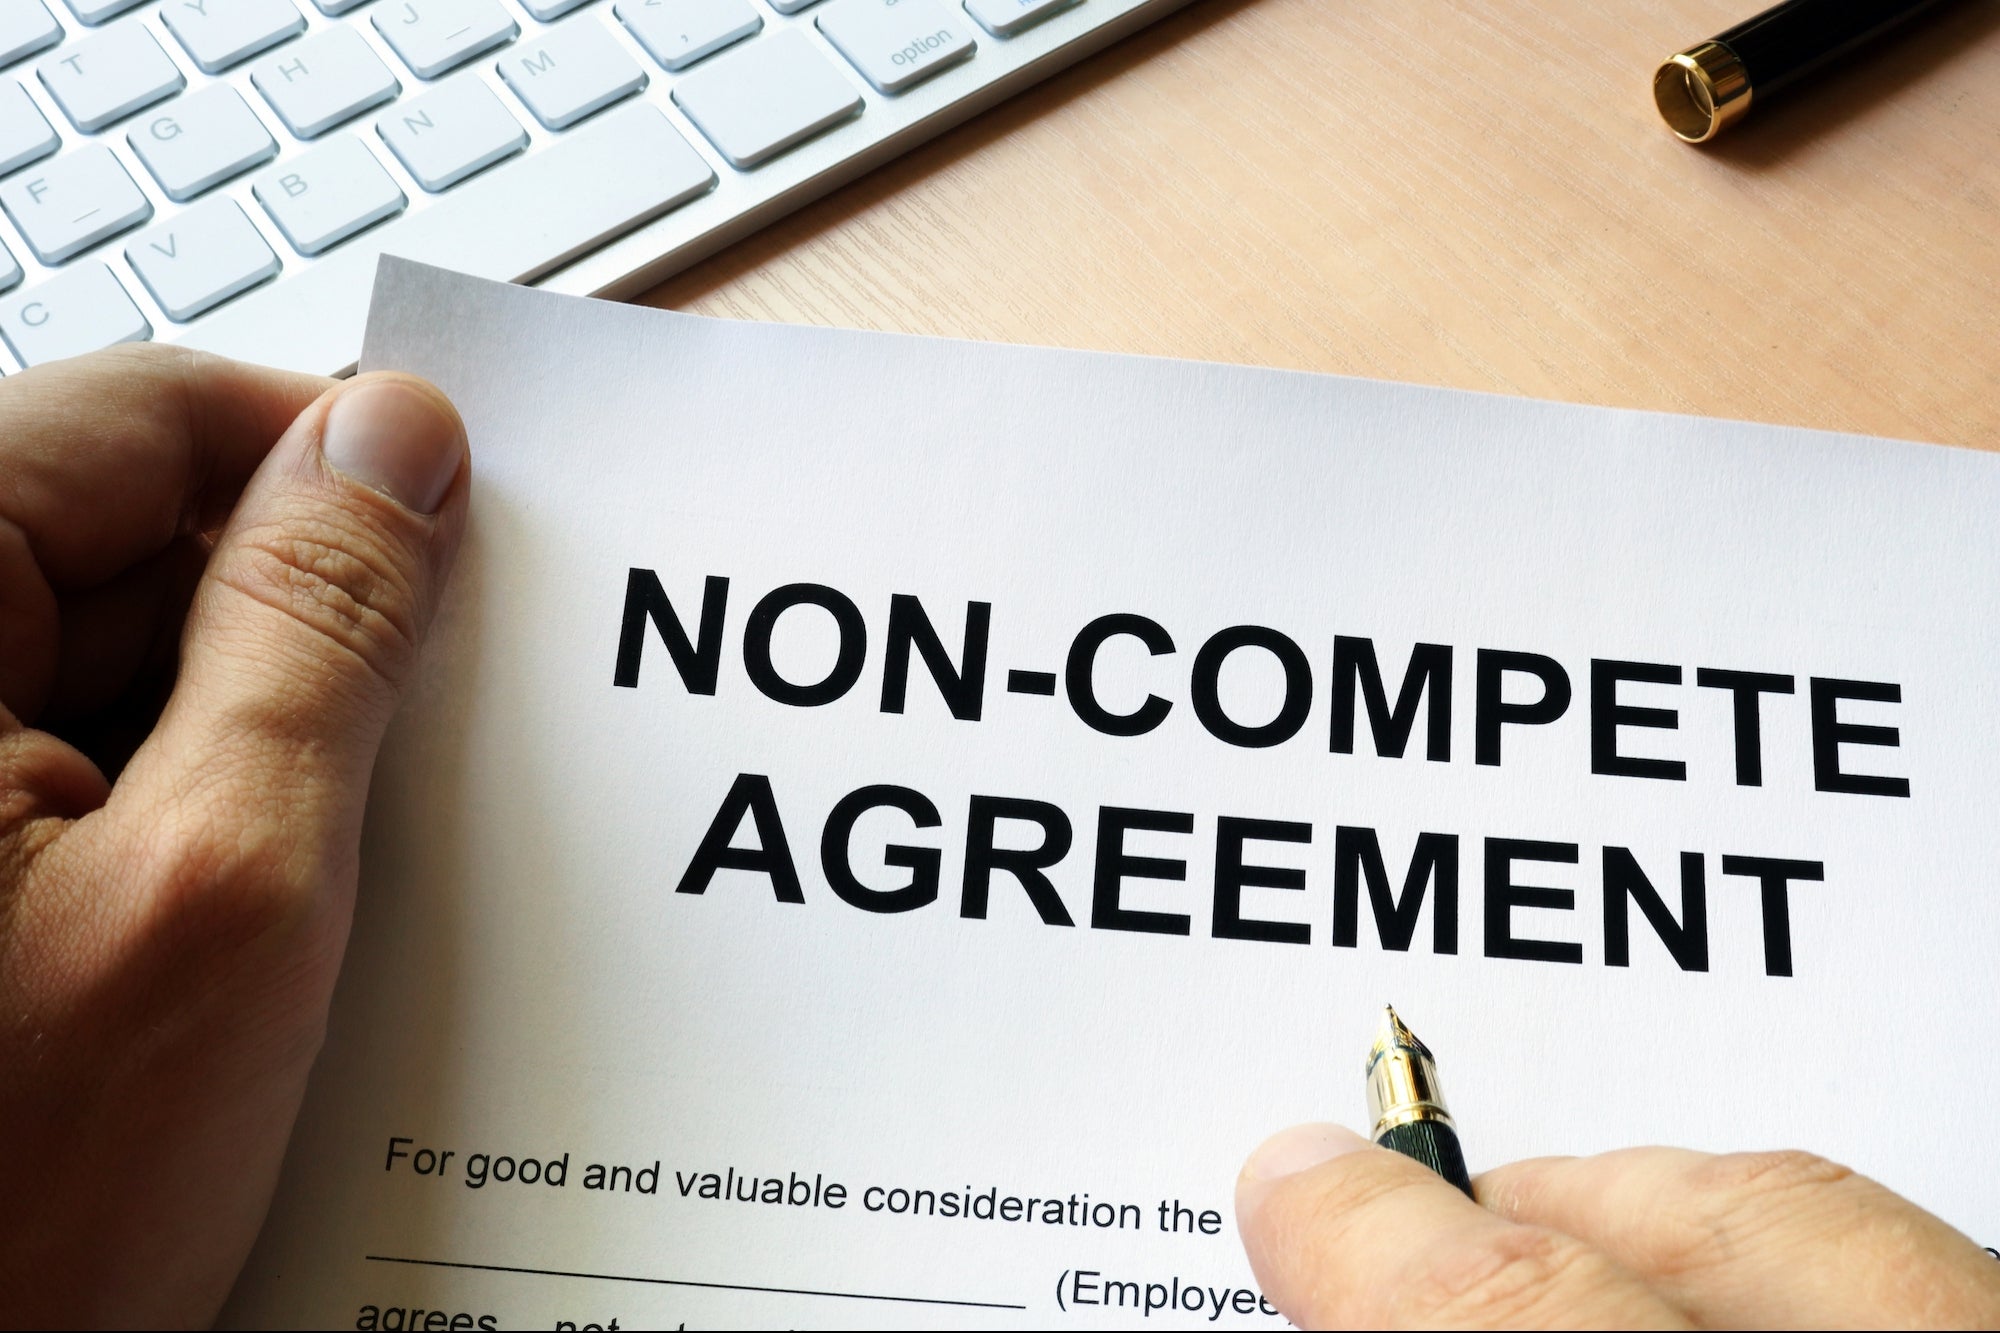 Non-Compete Agreements Under Nevada Law